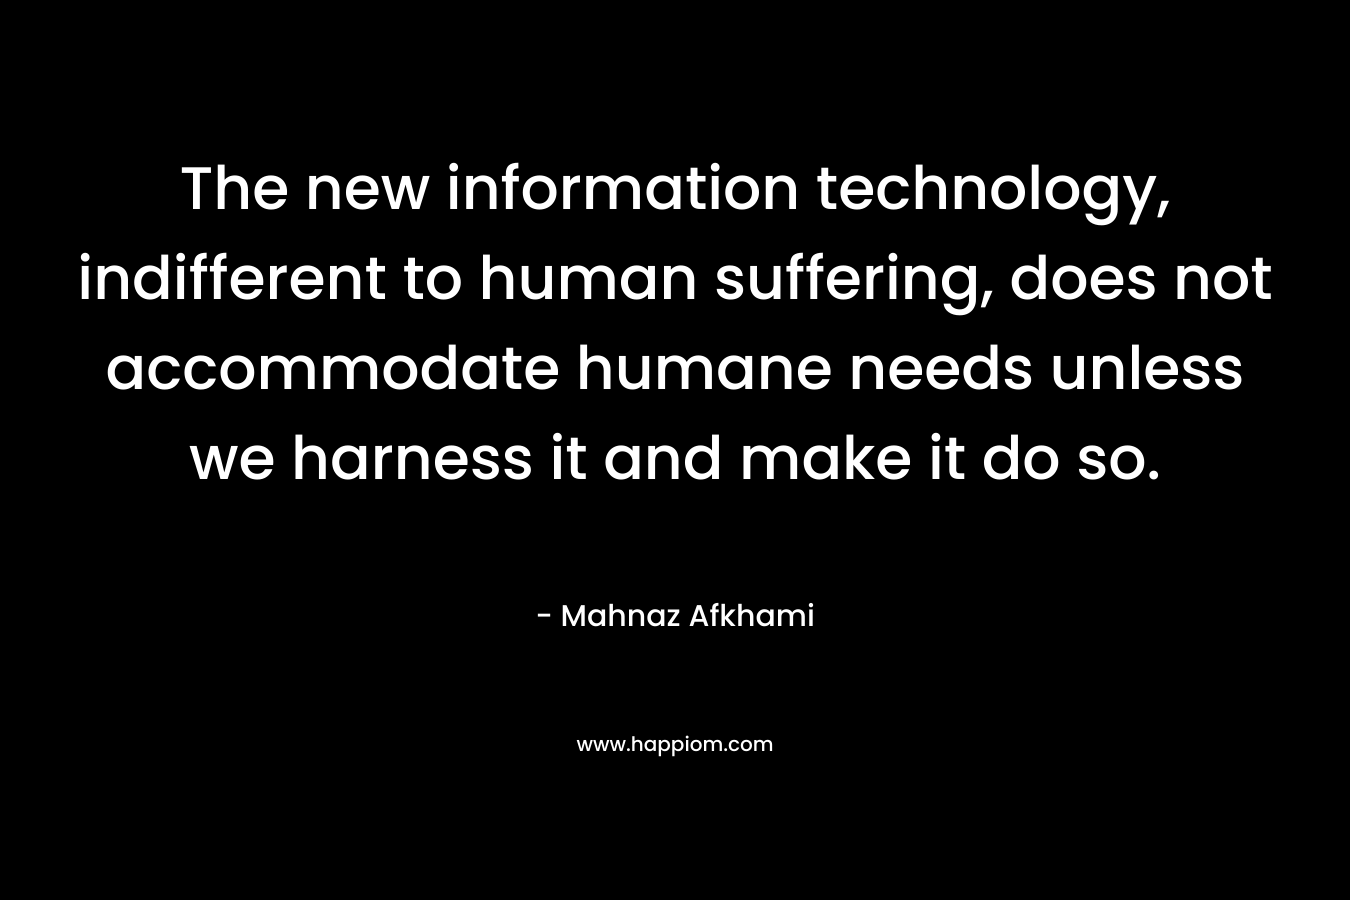 The new information technology, indifferent to human suffering, does not accommodate humane needs unless we harness it and make it do so. – Mahnaz Afkhami